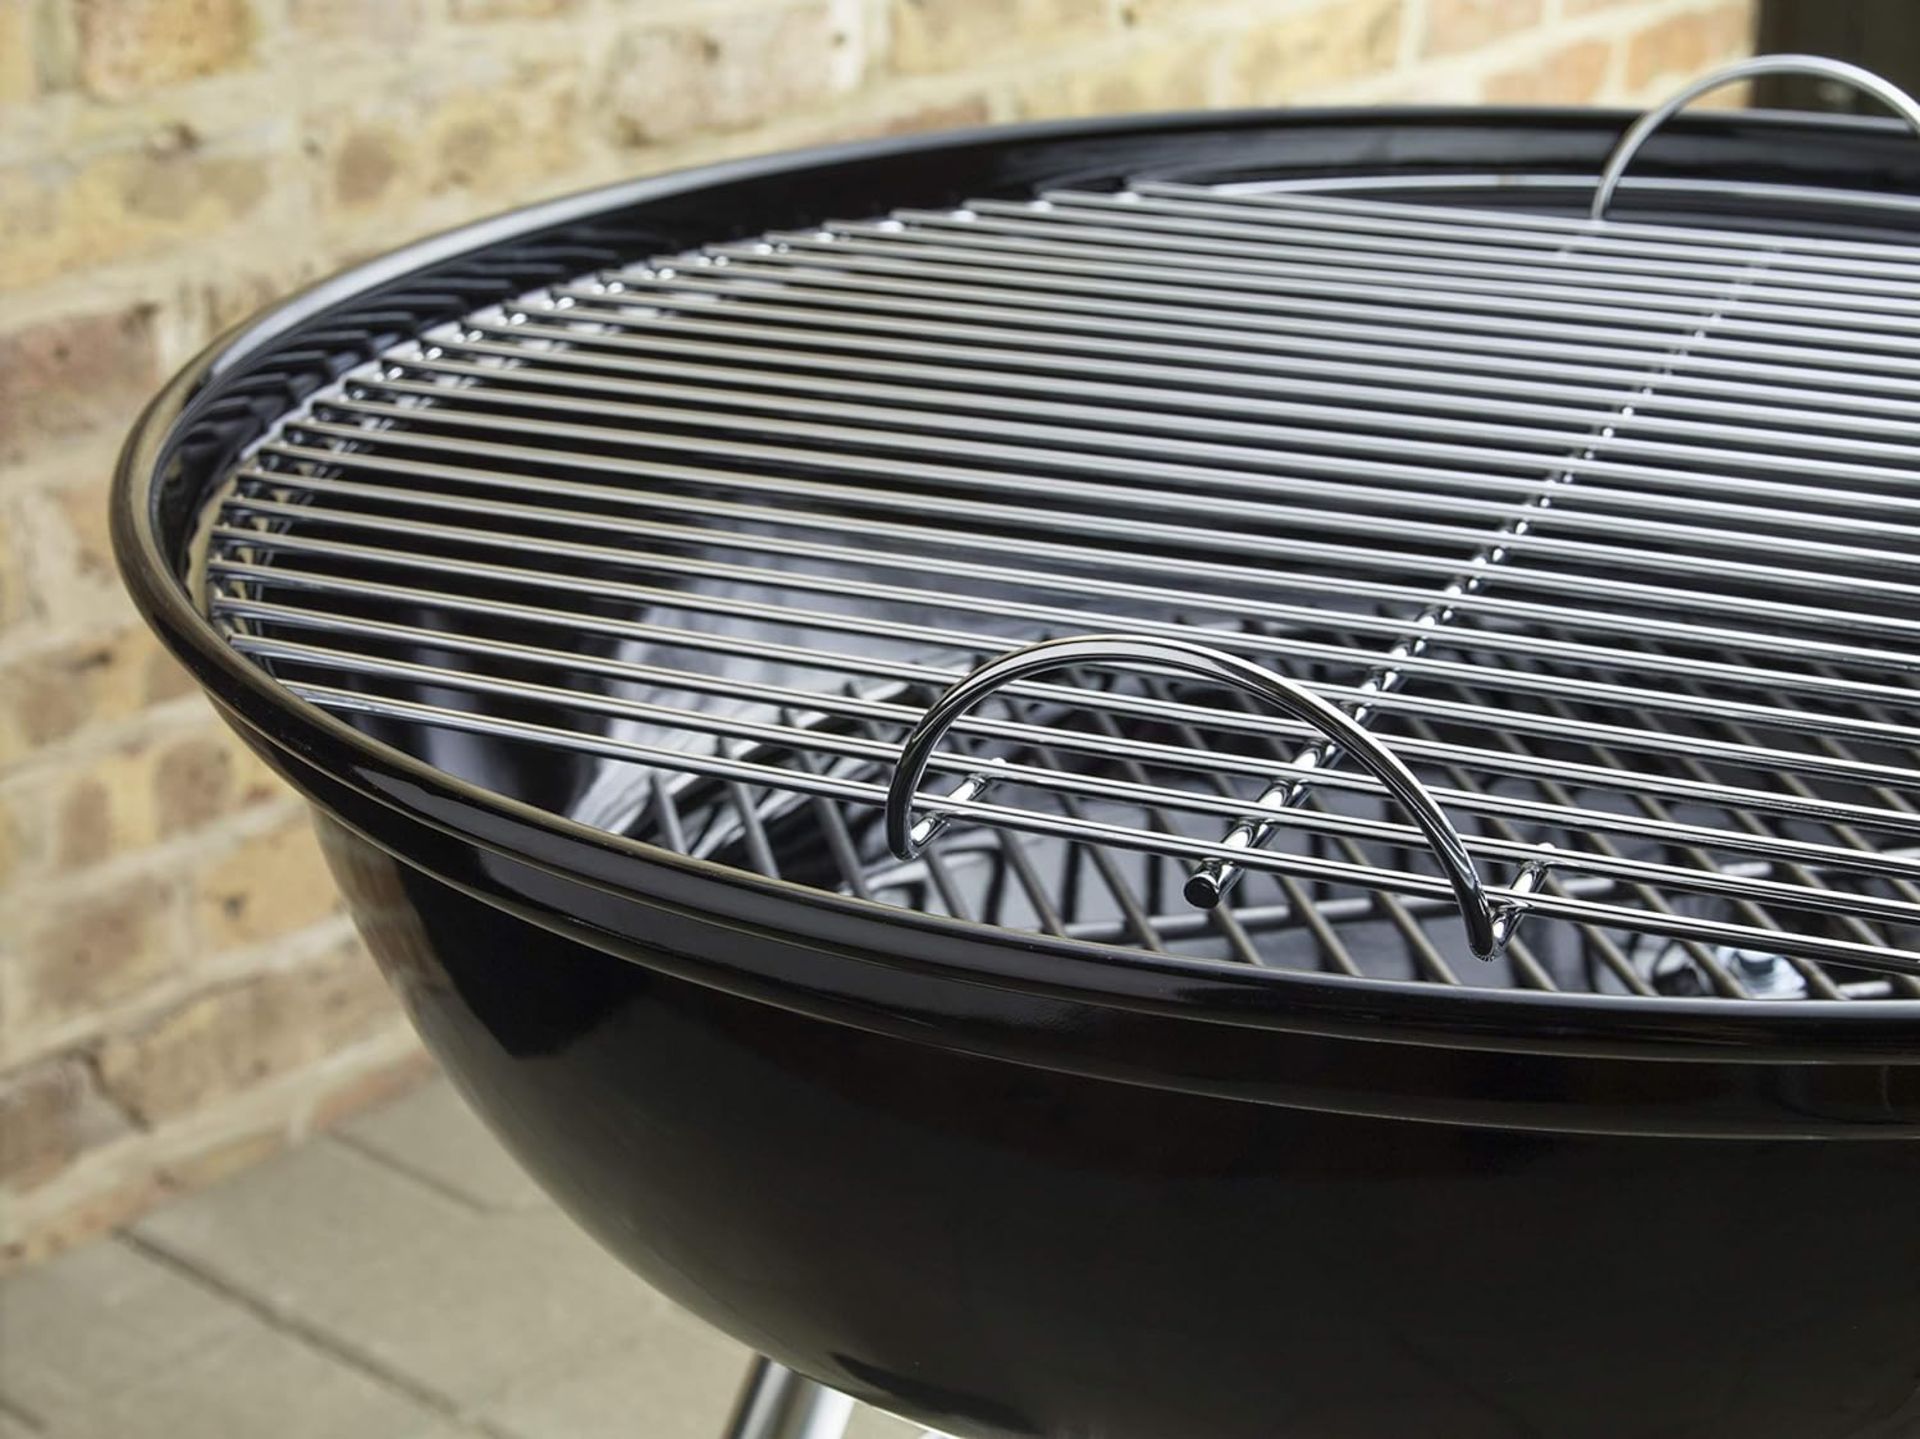 NEW & BOXED WEBER Compact 47cm Charcoal Barbecue. RRP £109.99 EACH. Whether sizzling hot dogs, - Image 2 of 5